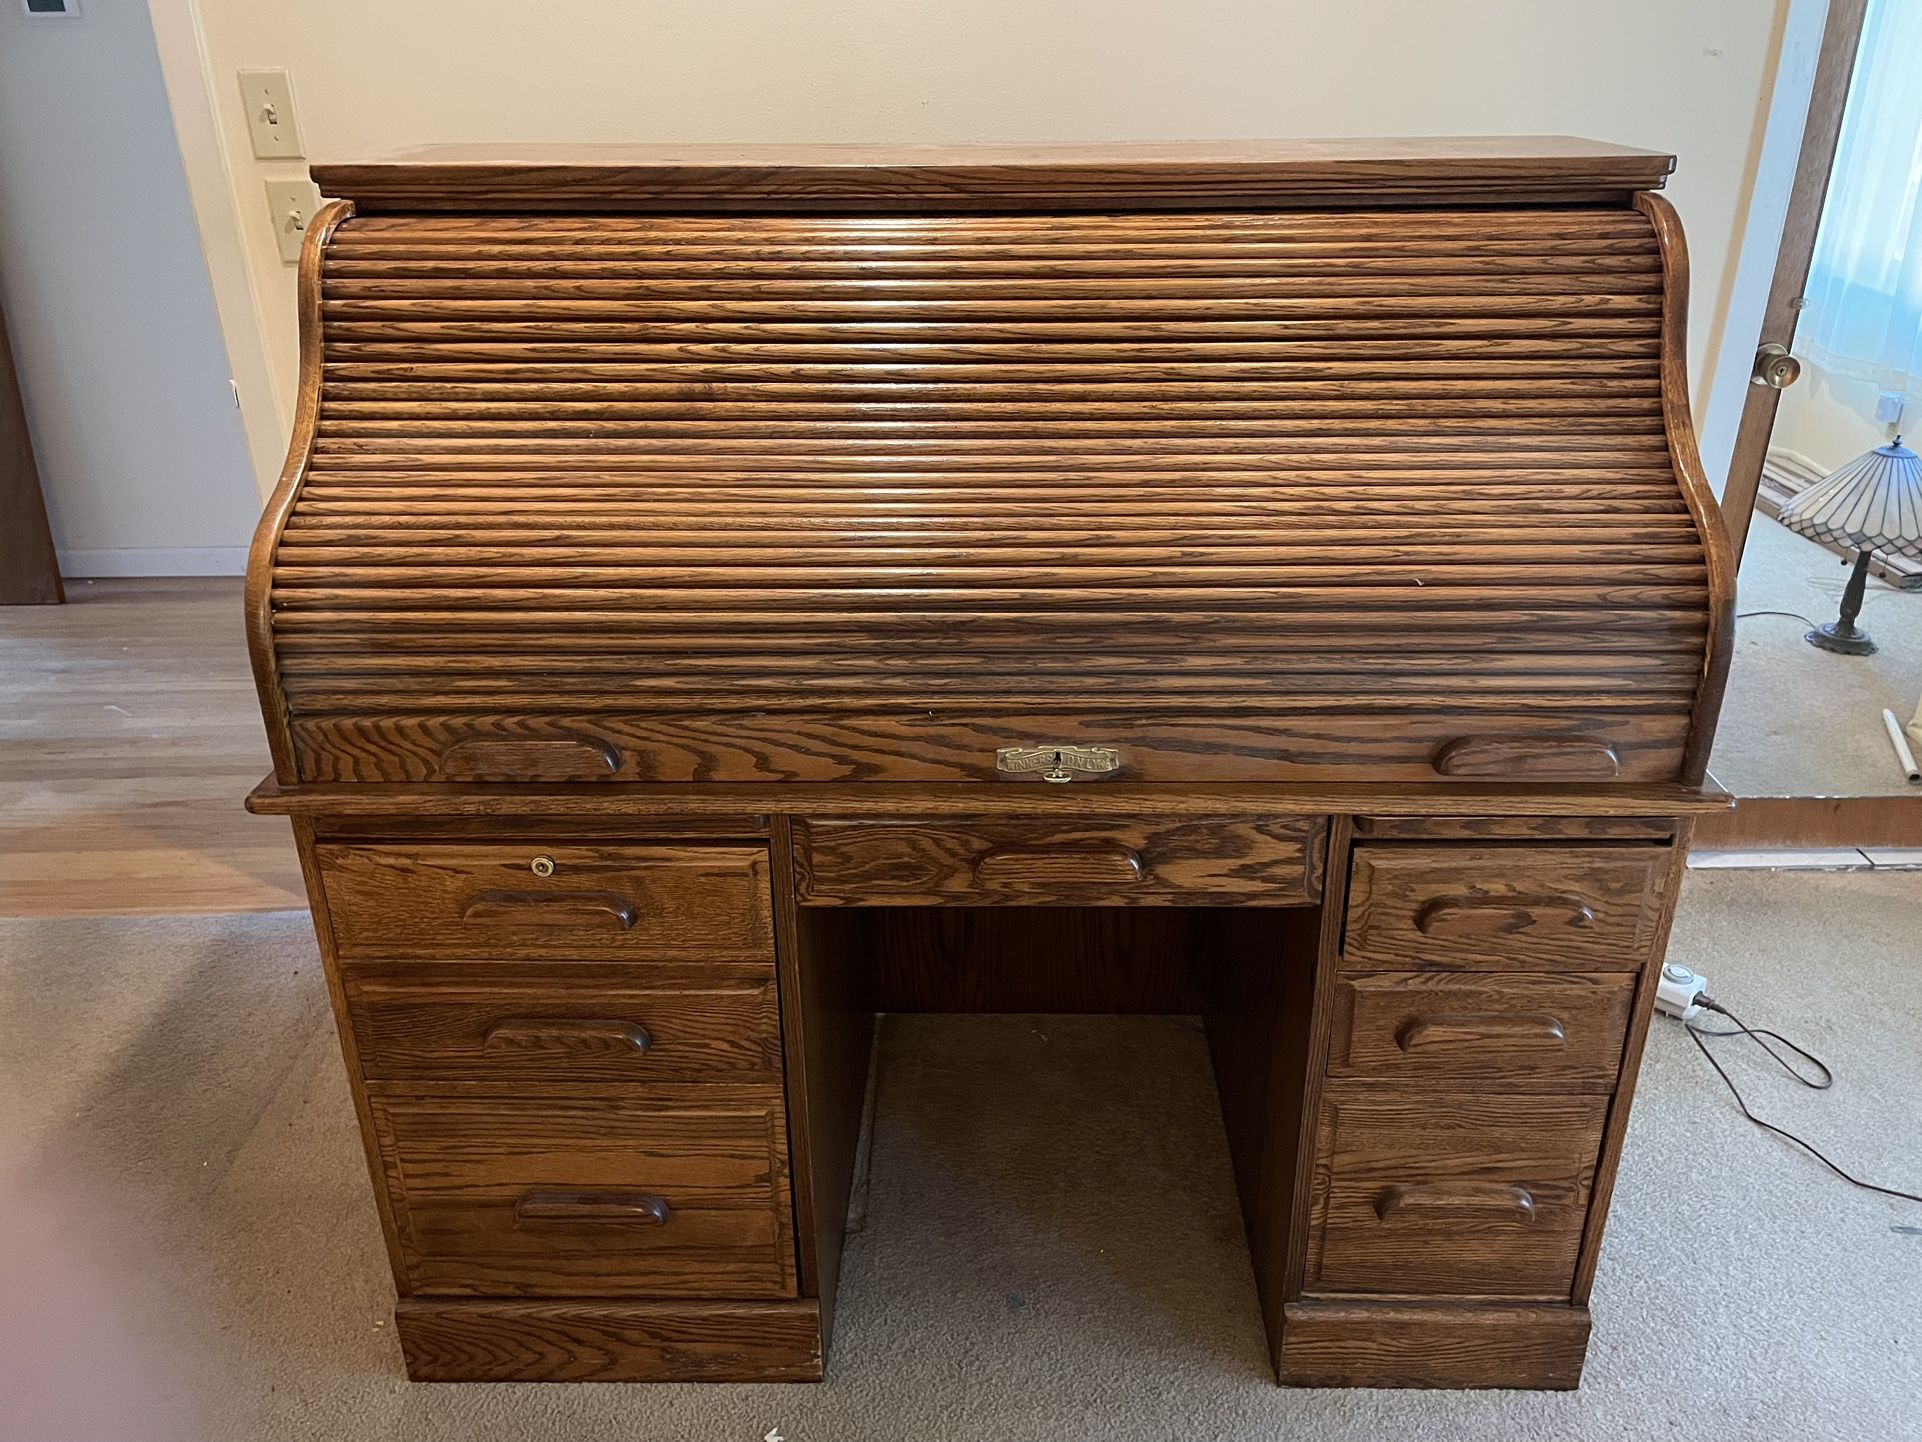  FREE (San Rafael pickup Only) Solid wood “winners only” Roll Top Desk 